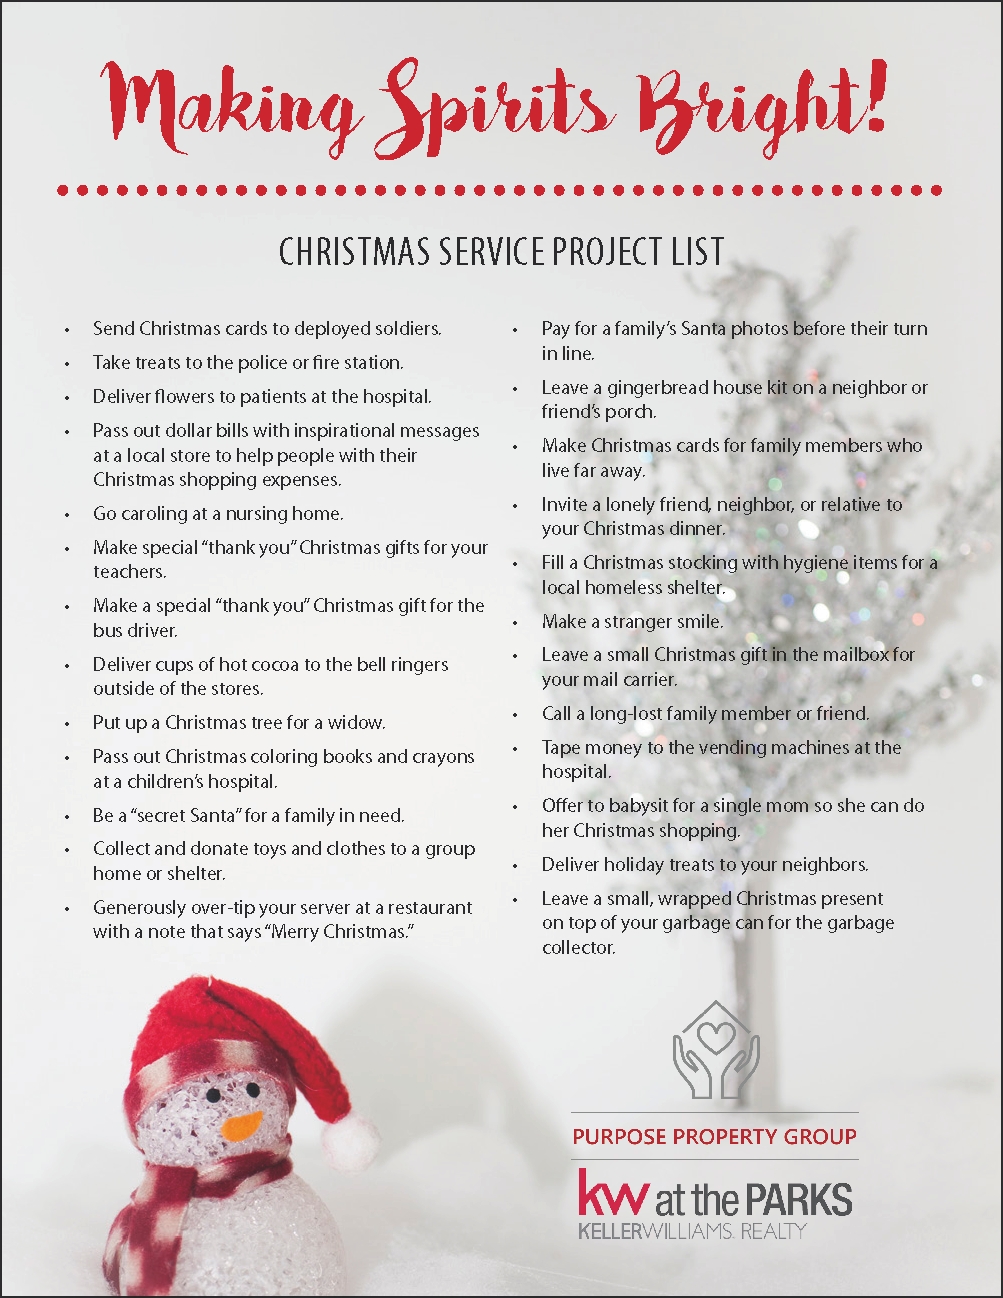 10 Fabulous Ideas For Community Service Projects holiday service project ideas for the whole family 2022